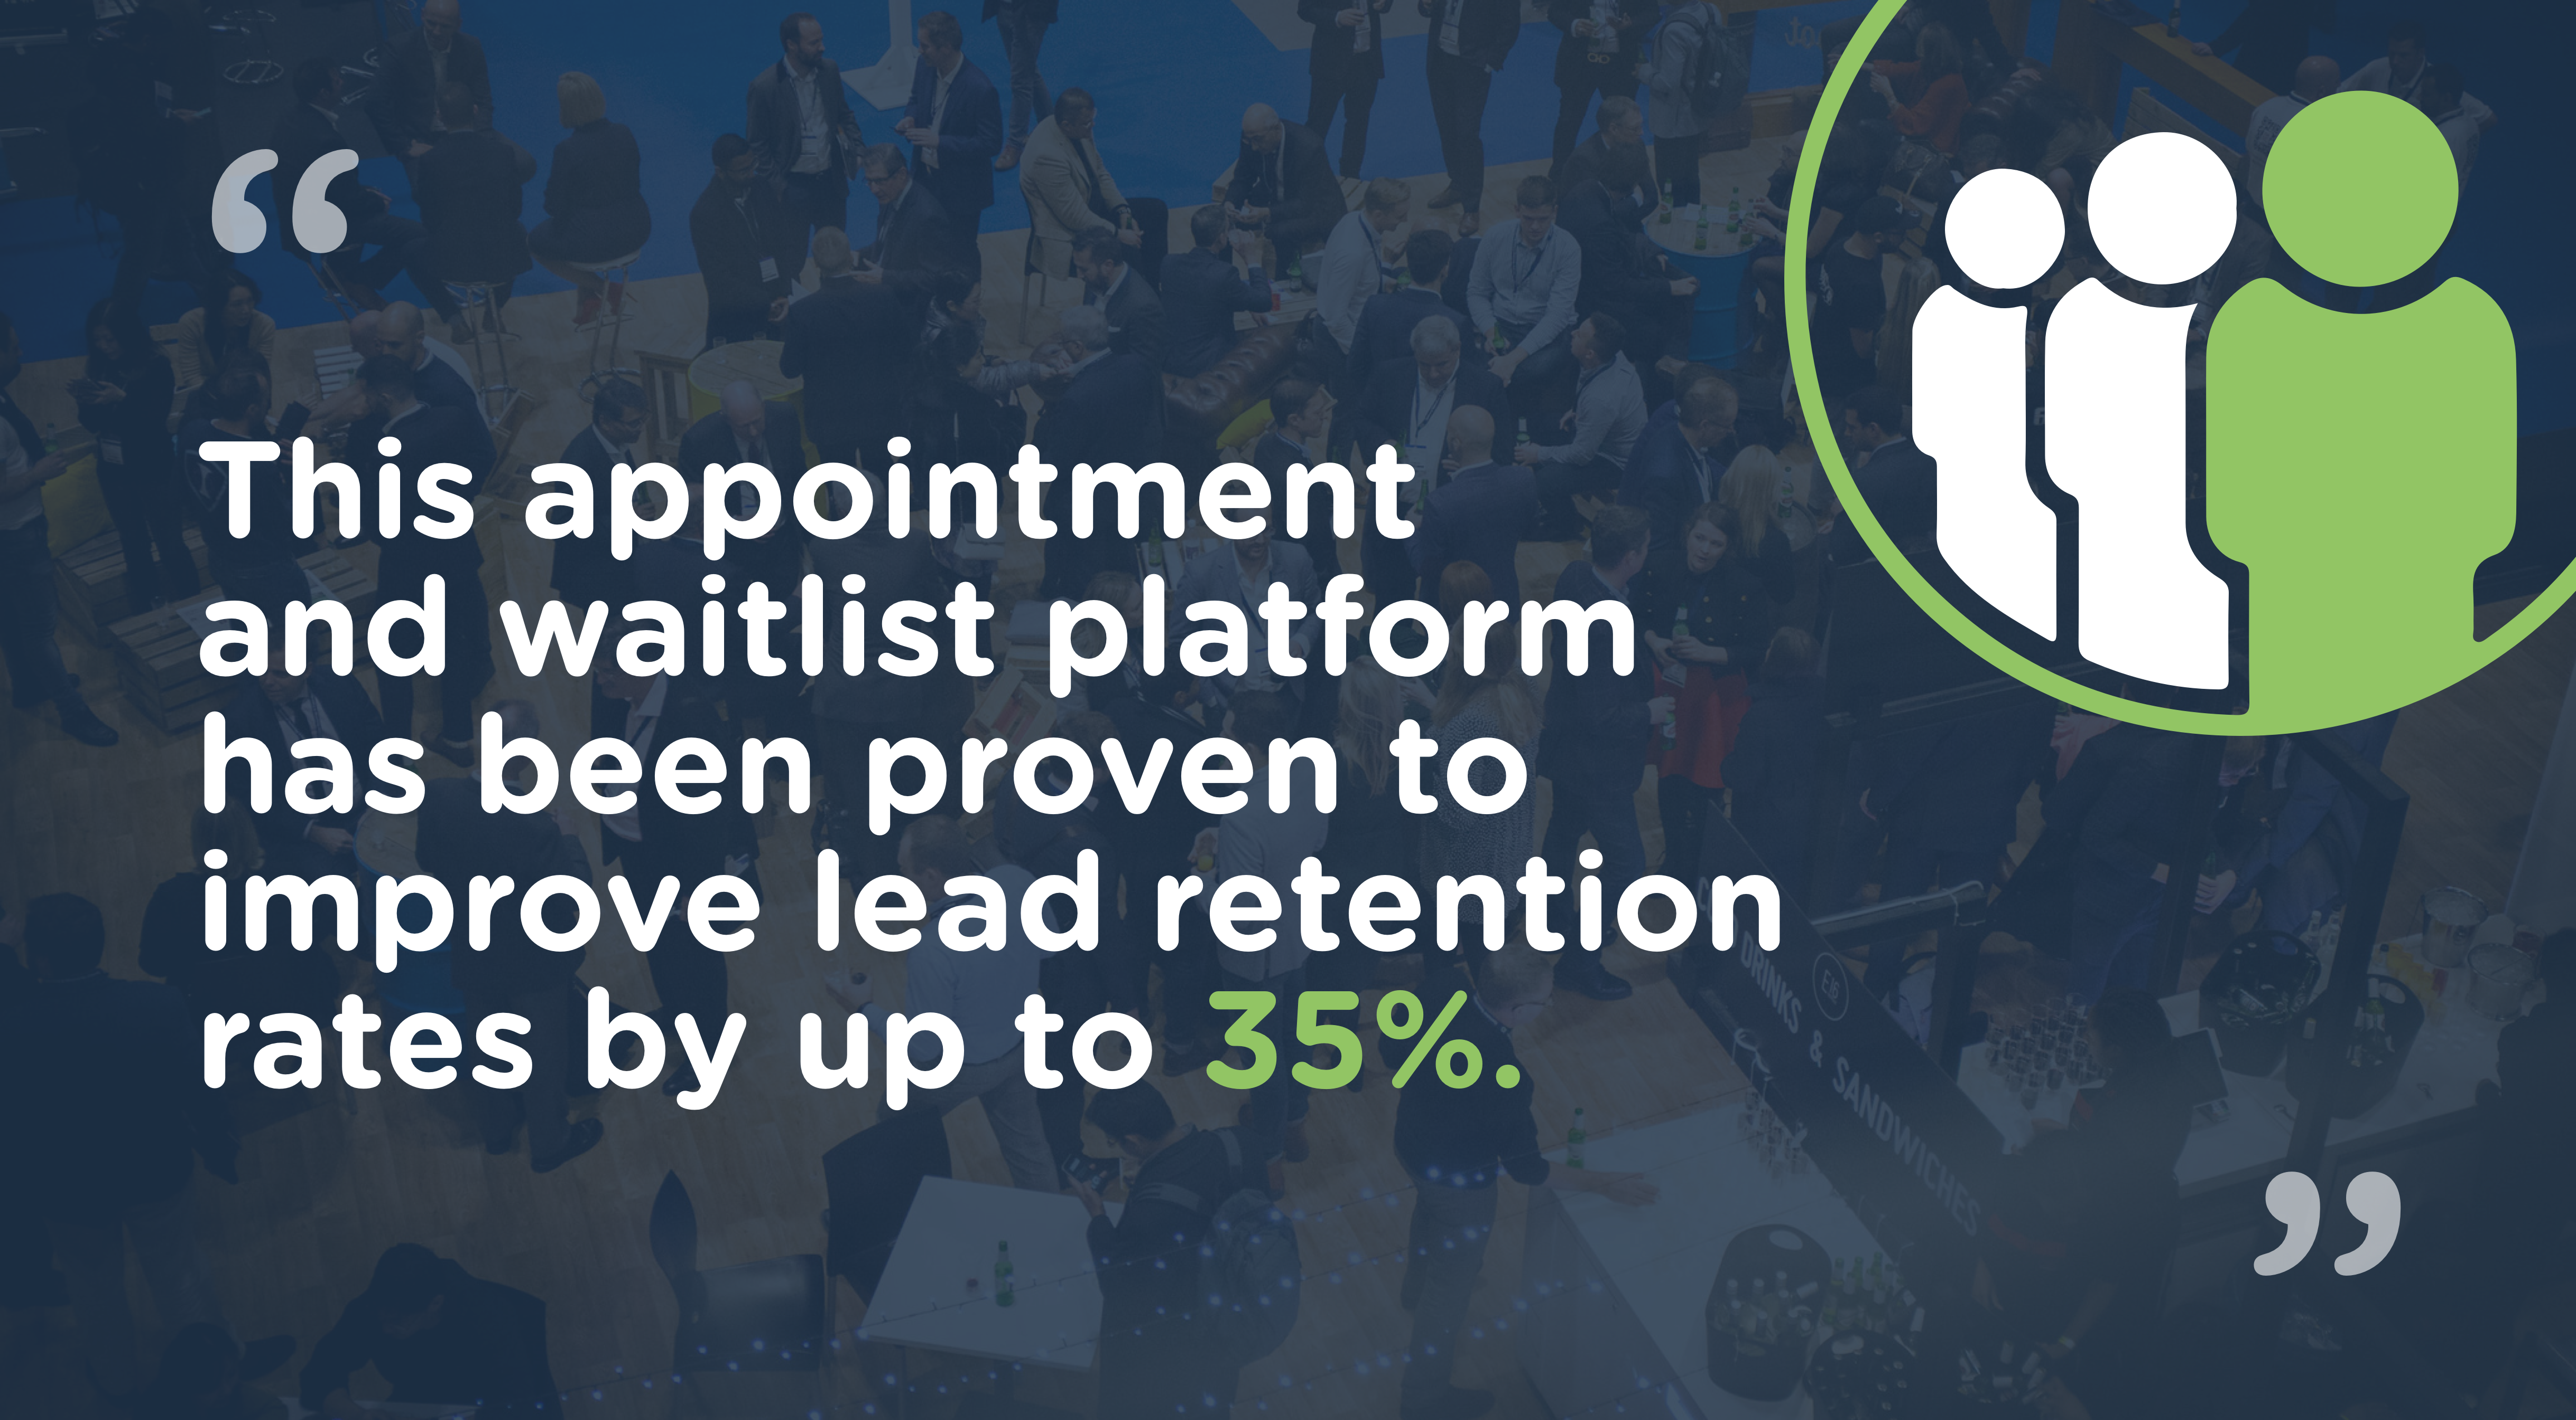 "This appointment and waitlist platform has been proven to improve lead retention rates by up to 35%"